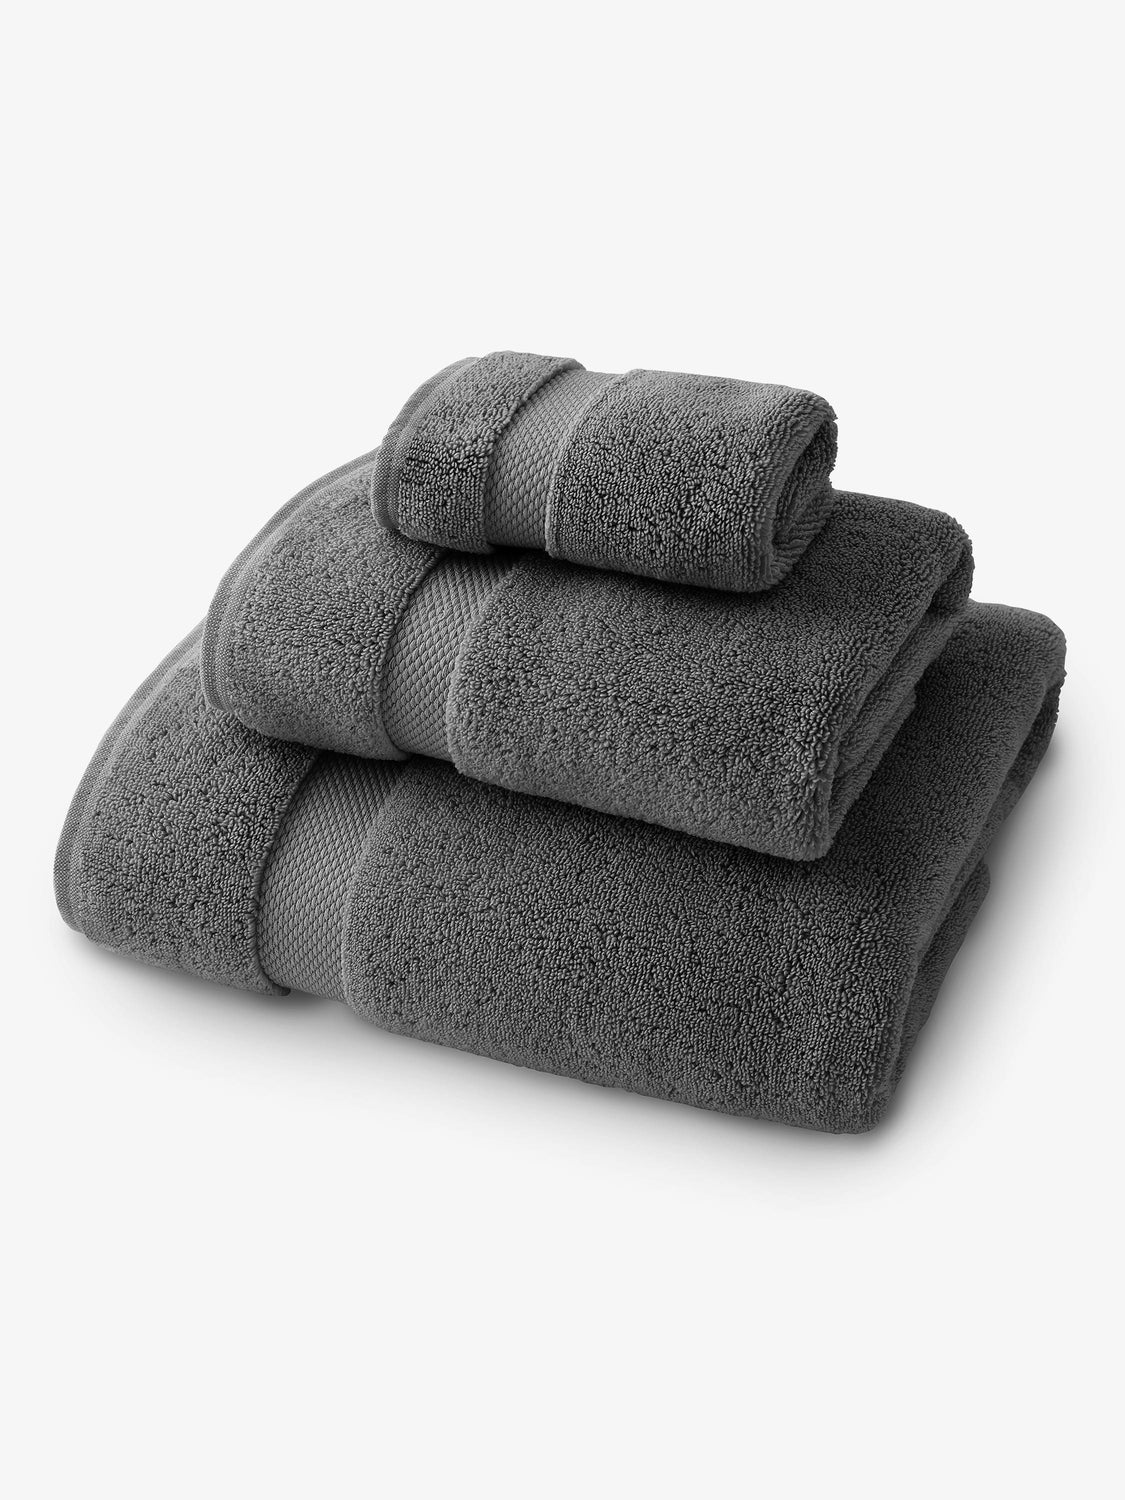 A set of dark gray bath, hand, and wash towels folded and stacked on one another.